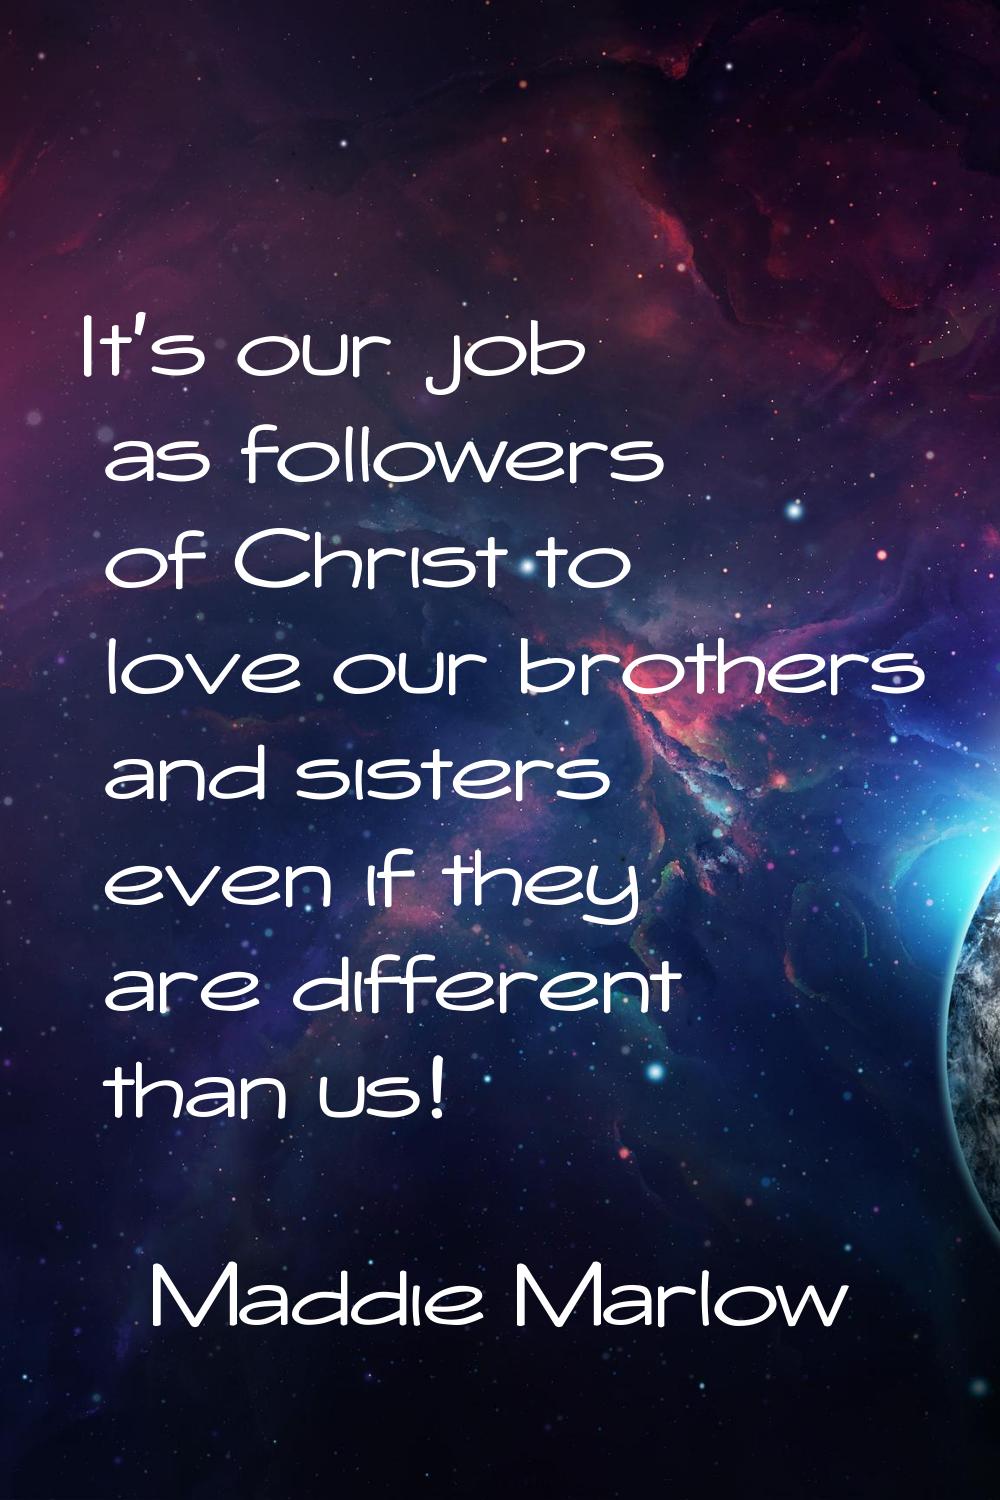 It's our job as followers of Christ to love our brothers and sisters even if they are different tha